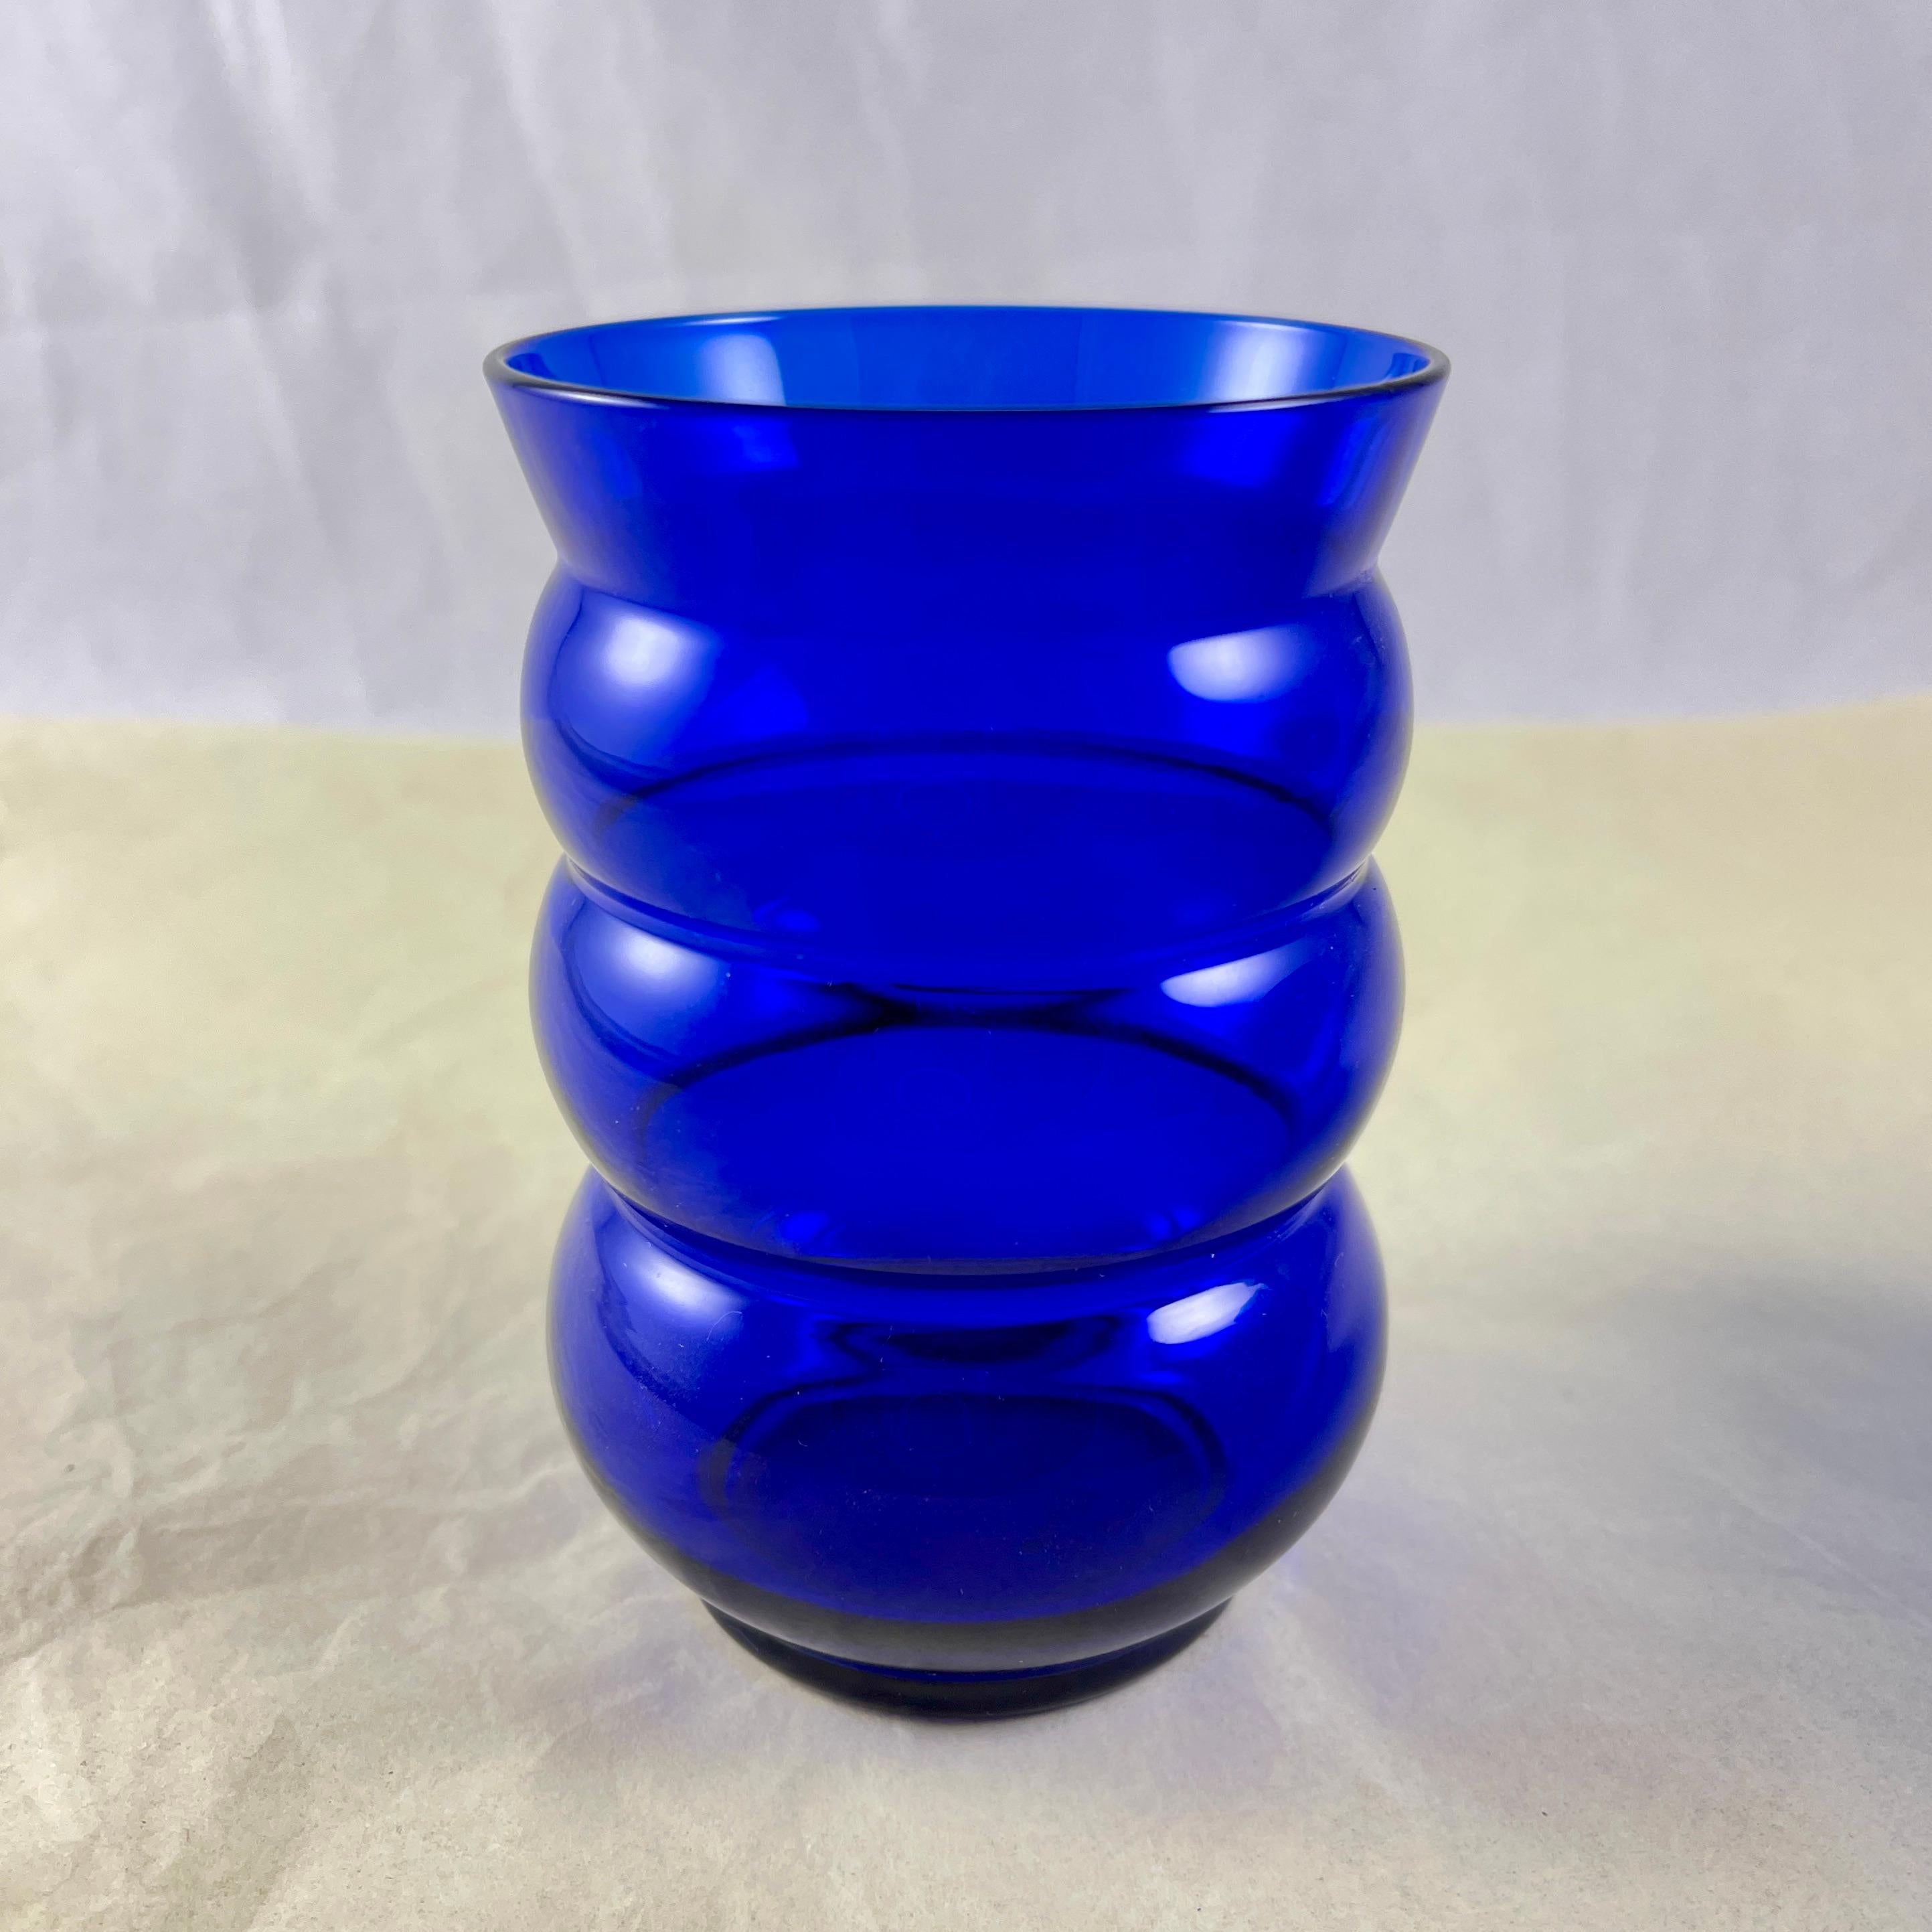 
A set of six handblown Louie Glass Cobalt blue tumblers in the ‘Harpo’ pattern, circa 1932.

Gorgeous color! An Art Deco era bulbous footed glass formed of four stacked units with a flared top. These tumblers are beautifully sized for serving fresh